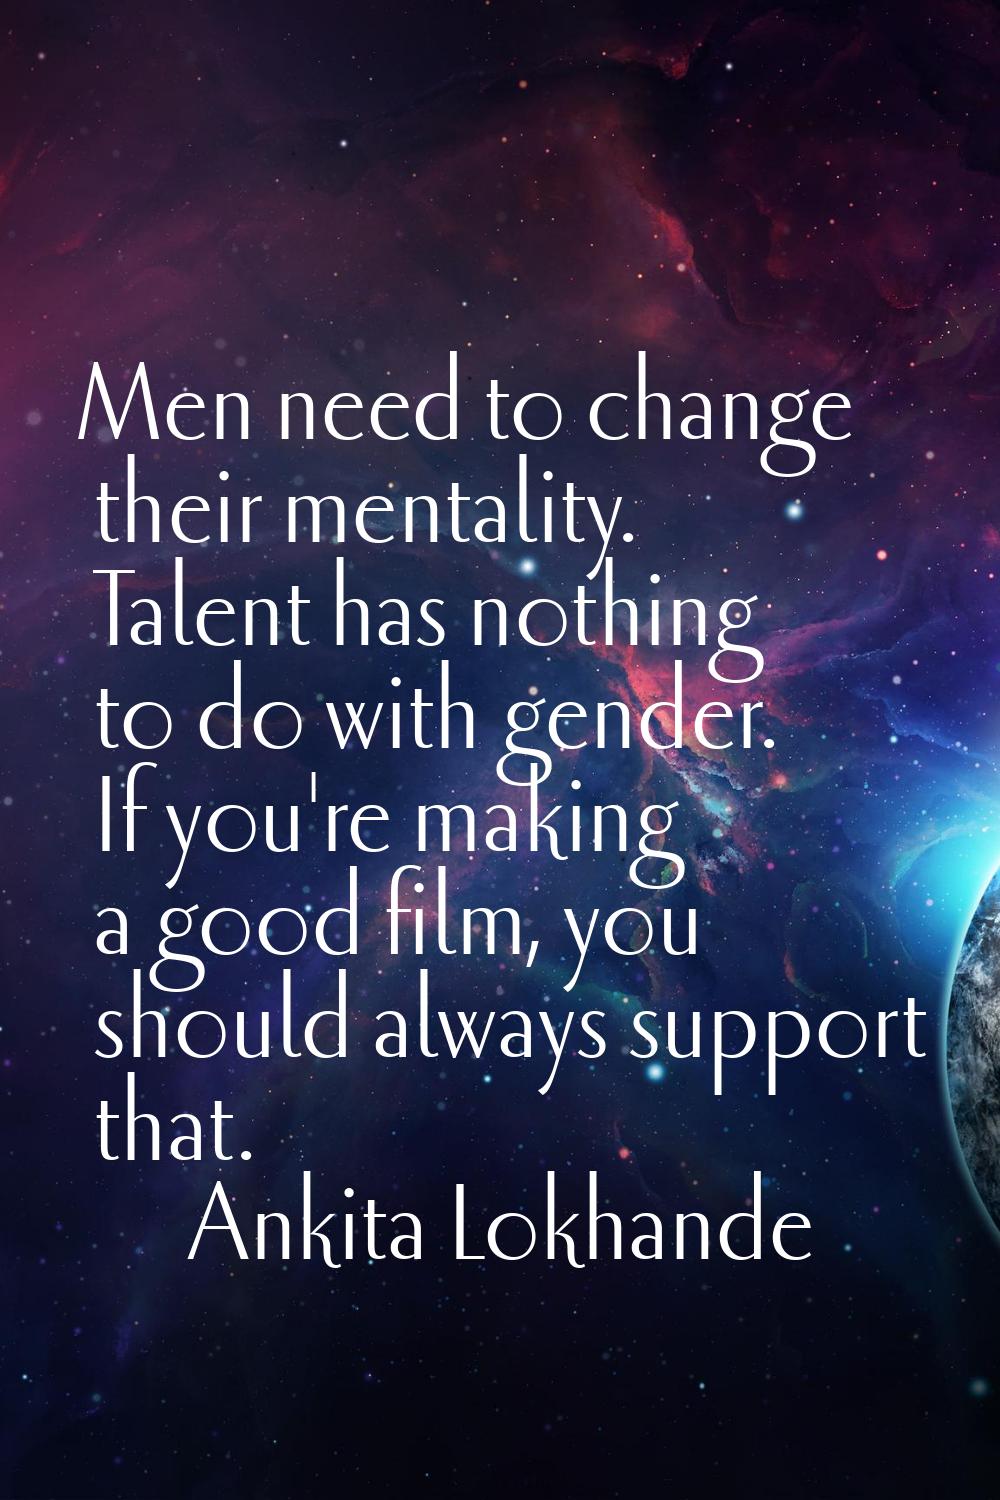 Men need to change their mentality. Talent has nothing to do with gender. If you're making a good f